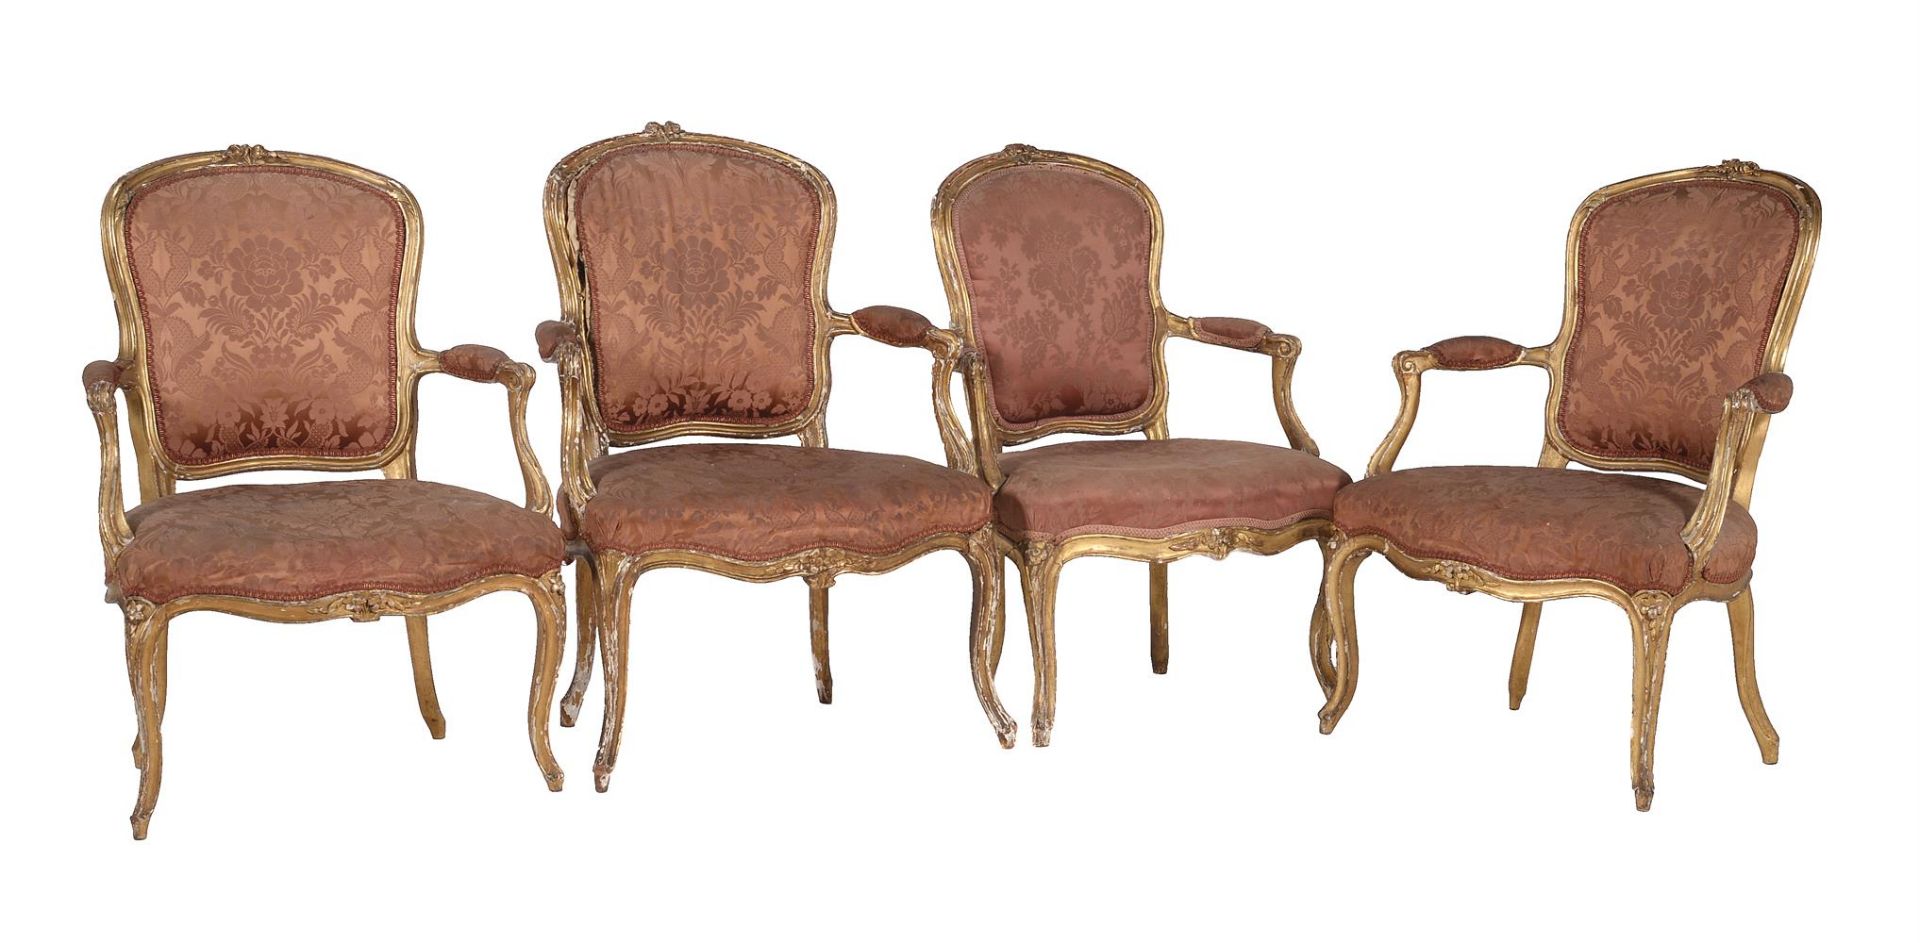 A harlequin set of four Louis XV giltwood and upholstered fauteuils